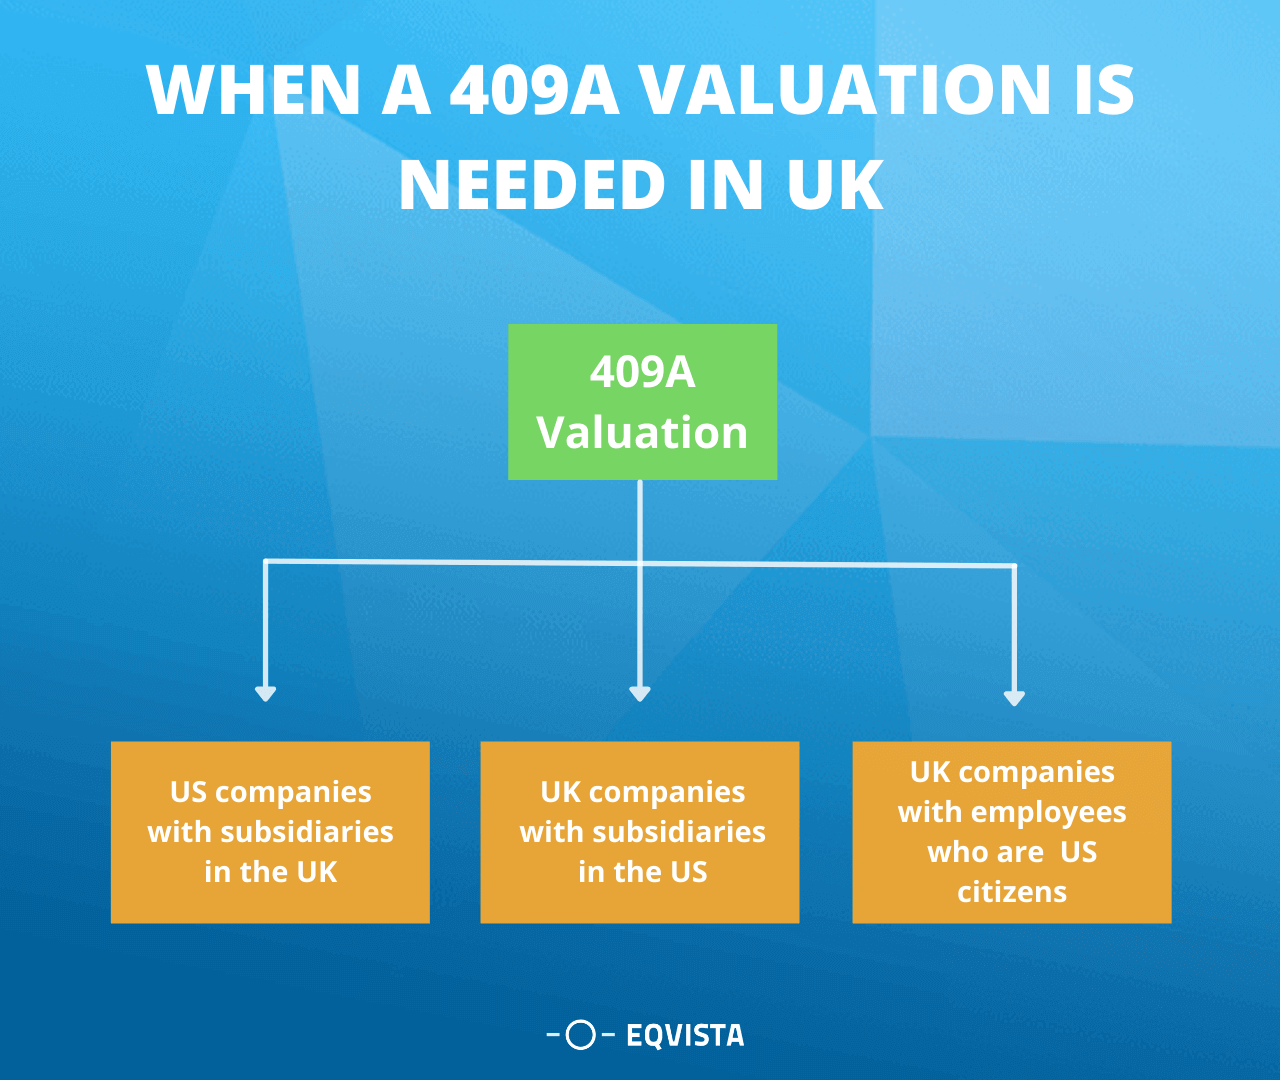 When is a 409a valuation required for a UK company?